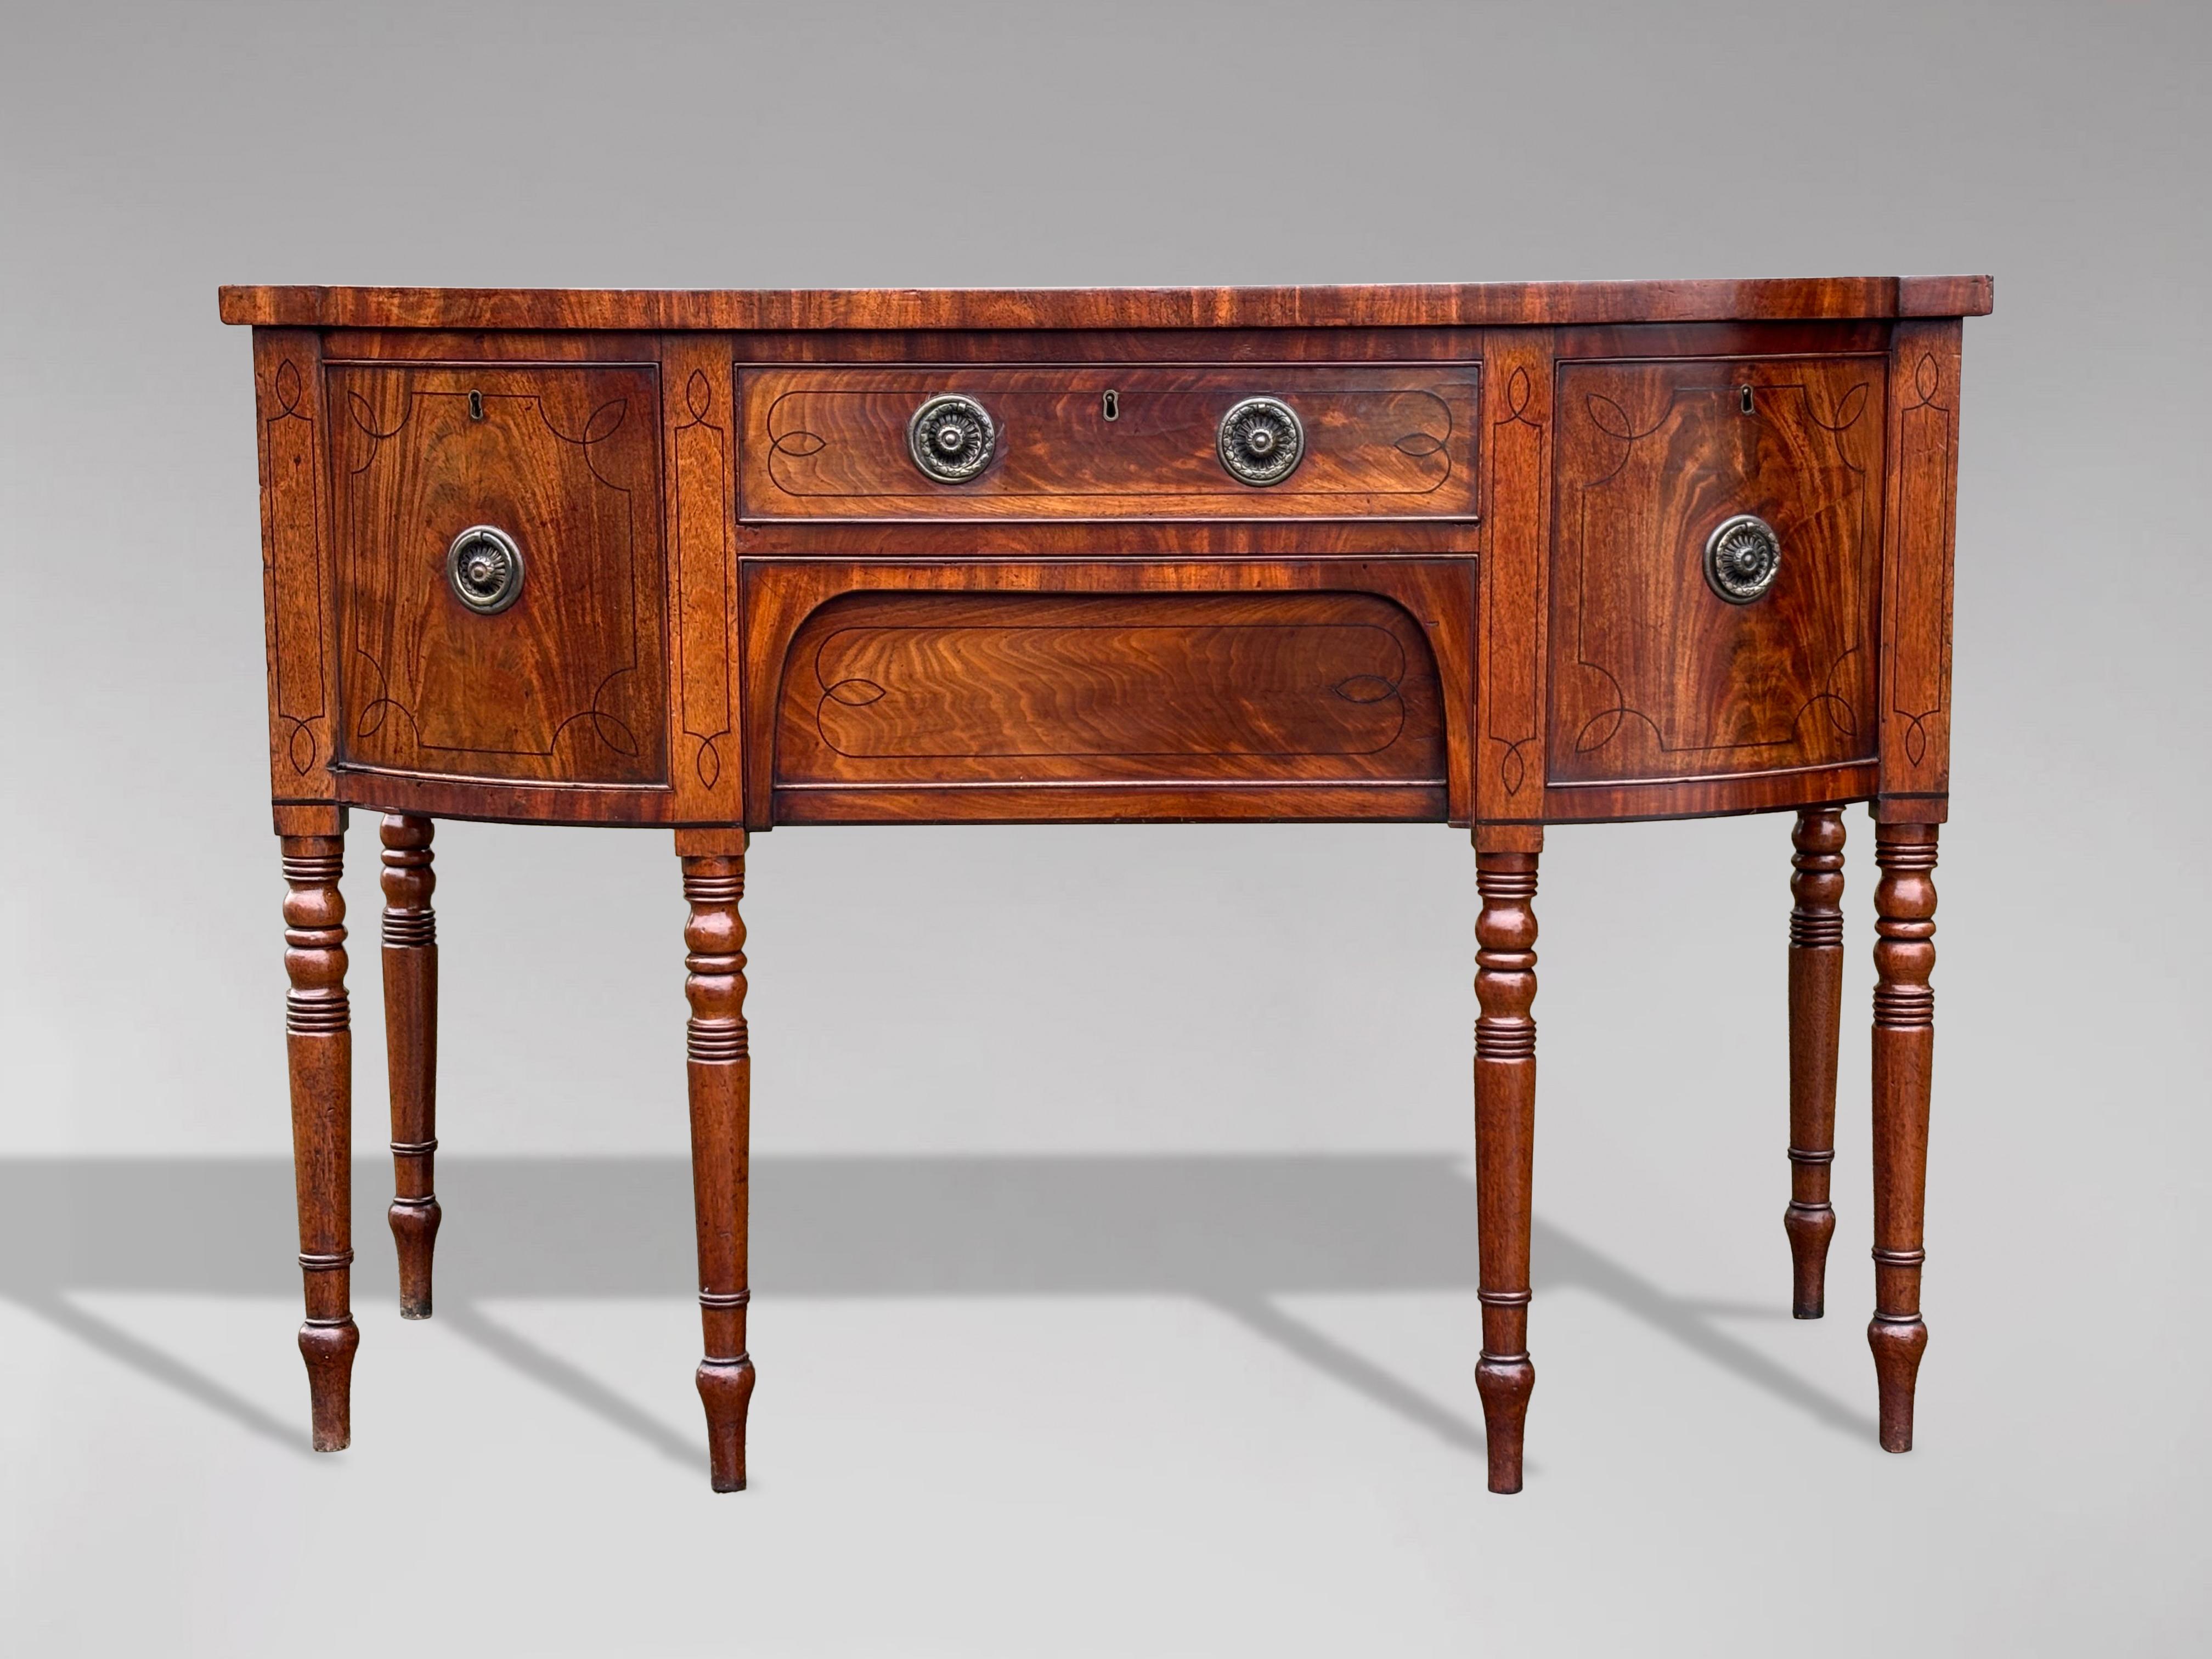 British Early 19th Century George III Period Sideboard For Sale